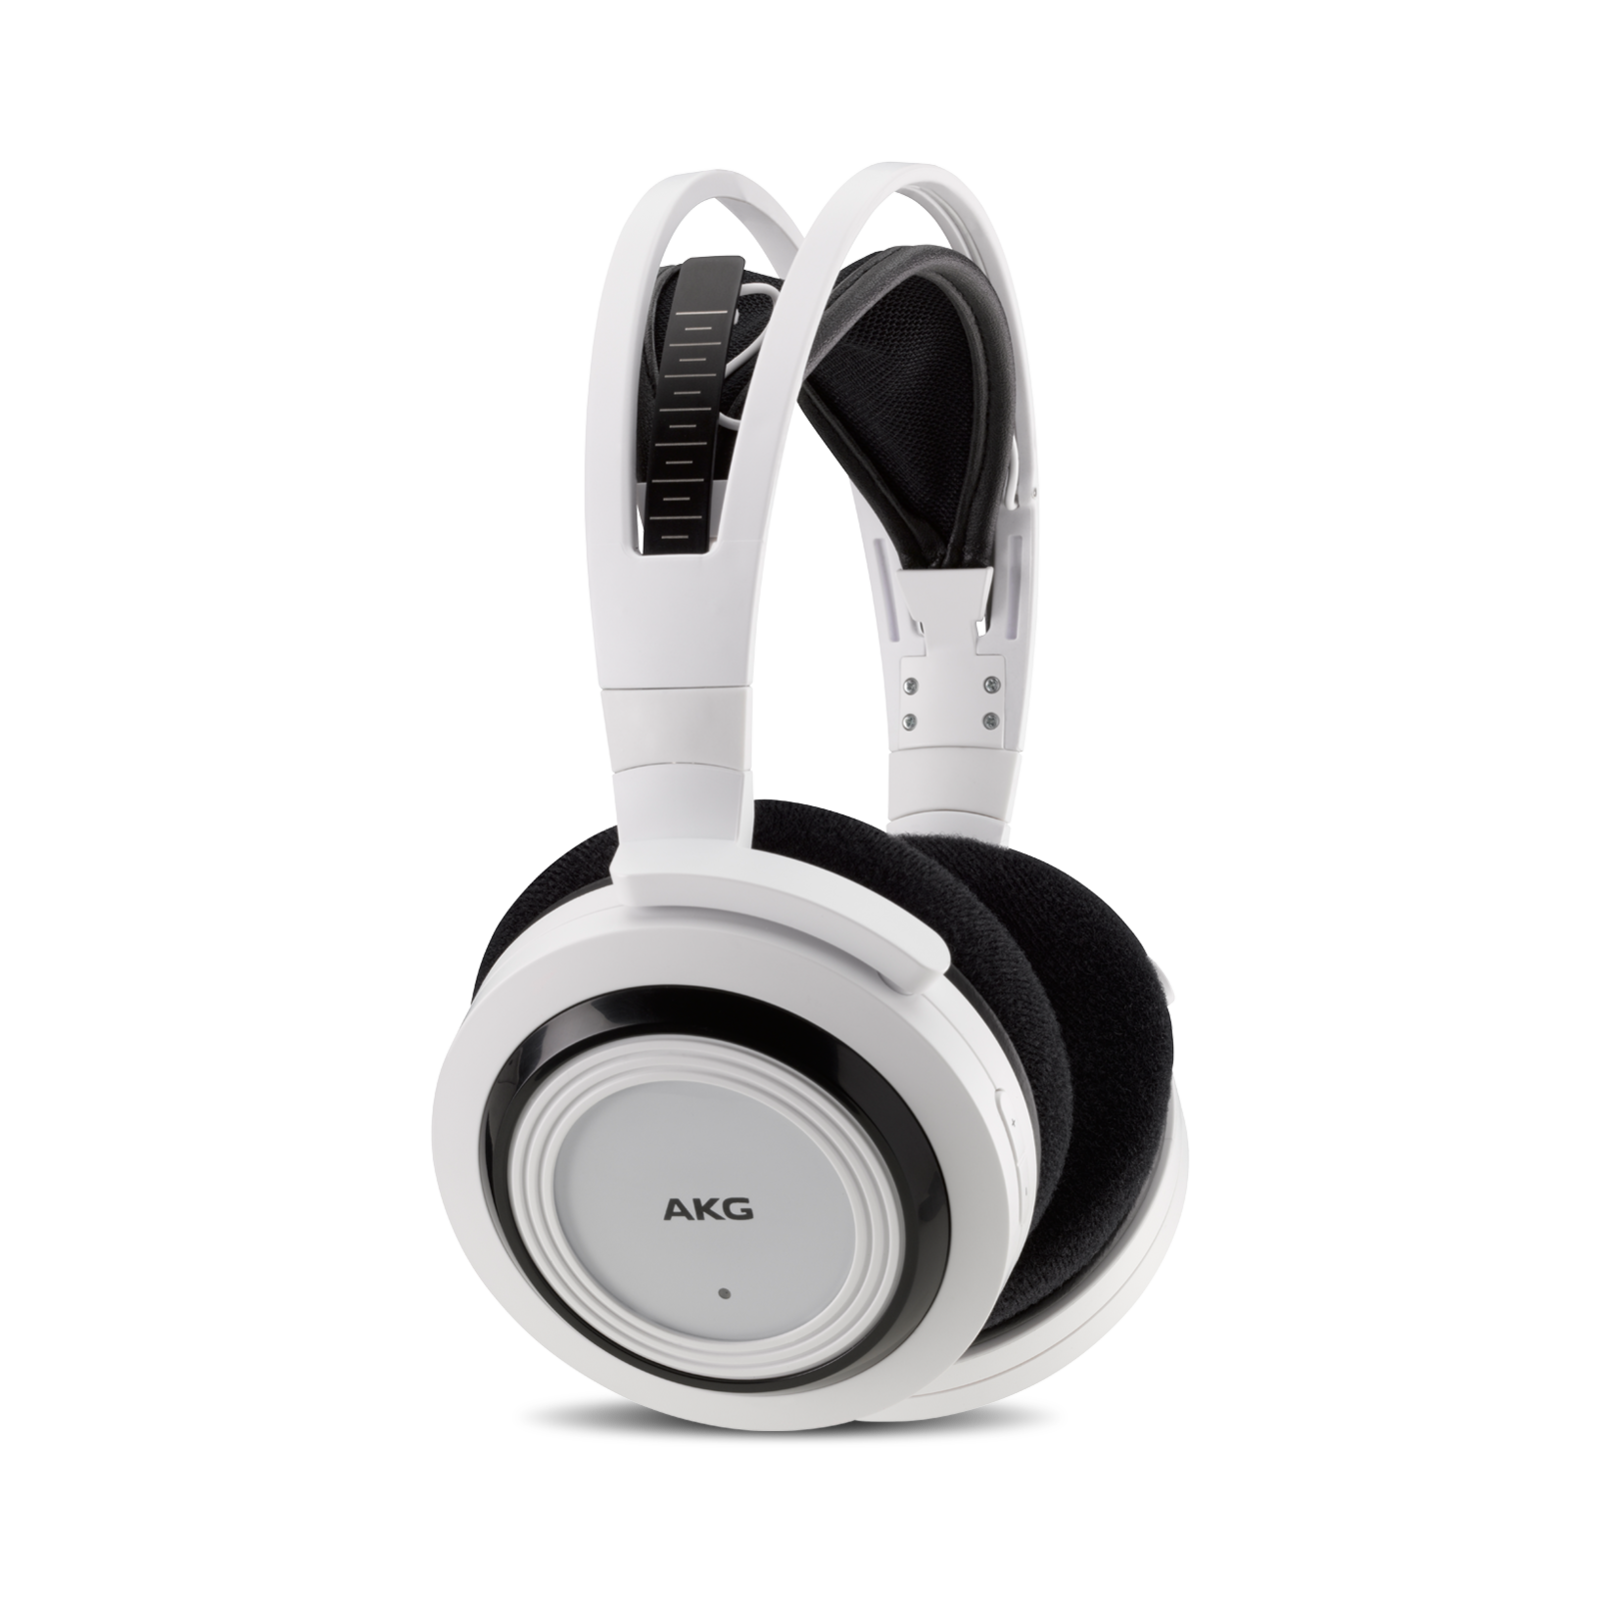 K 935 - White - High performance digital wireless stereo headphone optimized for movies, games and music - Detailshot 6